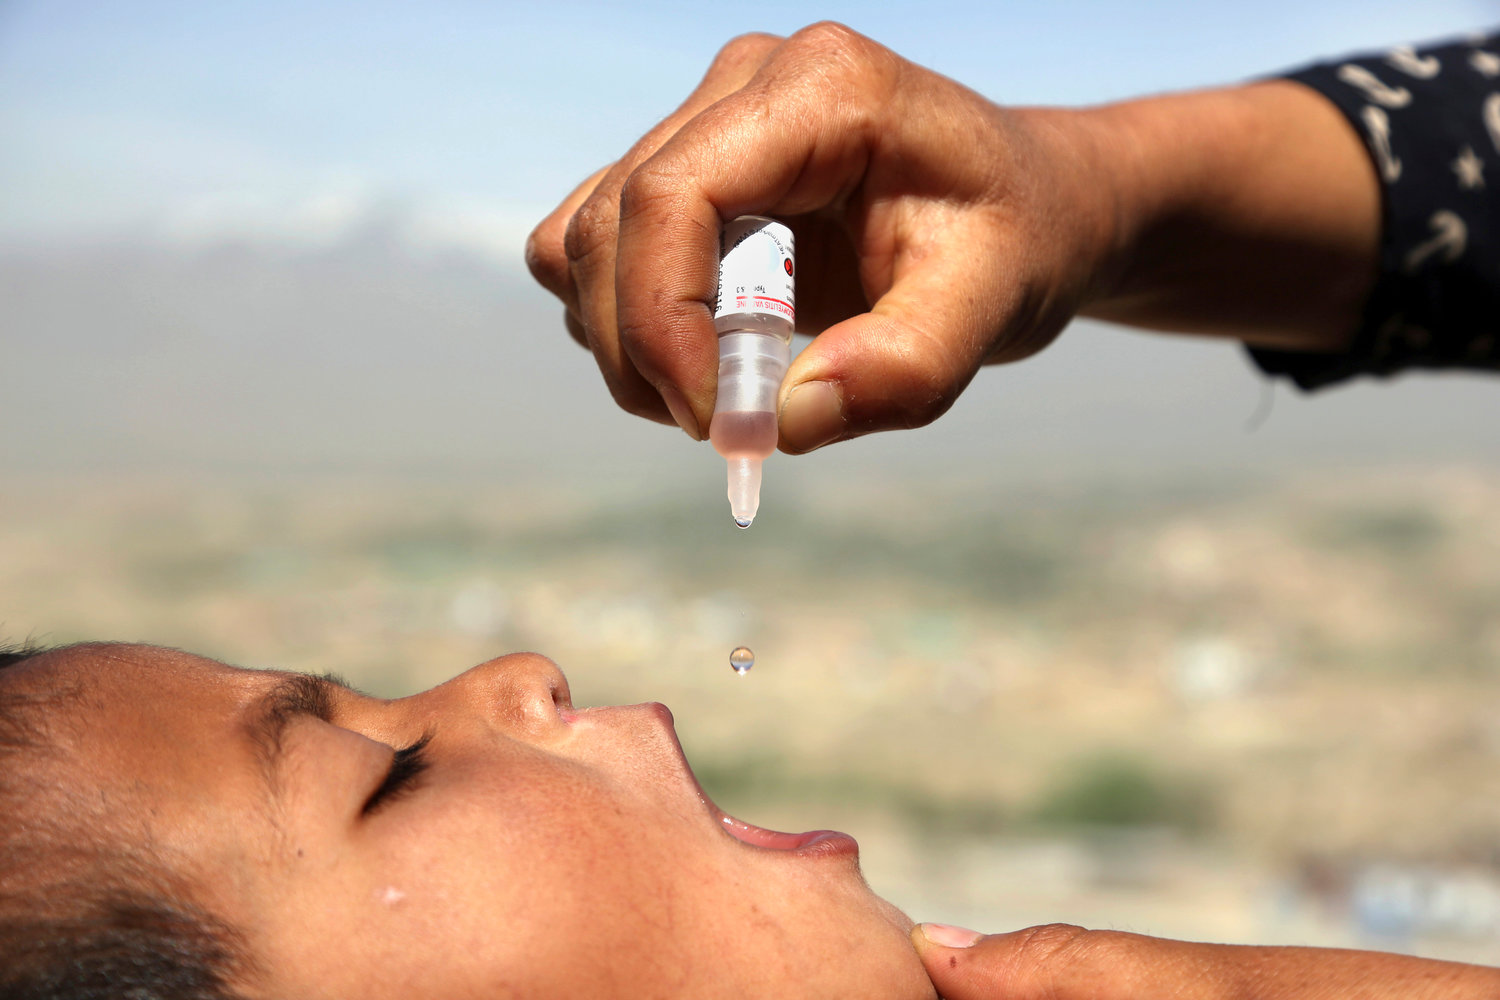 An Afghan health worker uses an oral polio vaccine on a child as part of a campaign to eliminate polio, on the outskirts of Kabul, Afghanistan, April 18, 2017. For years, global health officials have used billions of drops of an oral vaccine in a remarkably effective campaign aimed at wiping out polio in its last remaining strongholds — typically, poor, politically unstable corners of the world. Now, in a surprising twist in the decades-long effort to eradicate the virus, authorities in Jerusalem, New York and London have discovered evidence that polio is spreading there. The source of the virus? The oral vaccine itself.